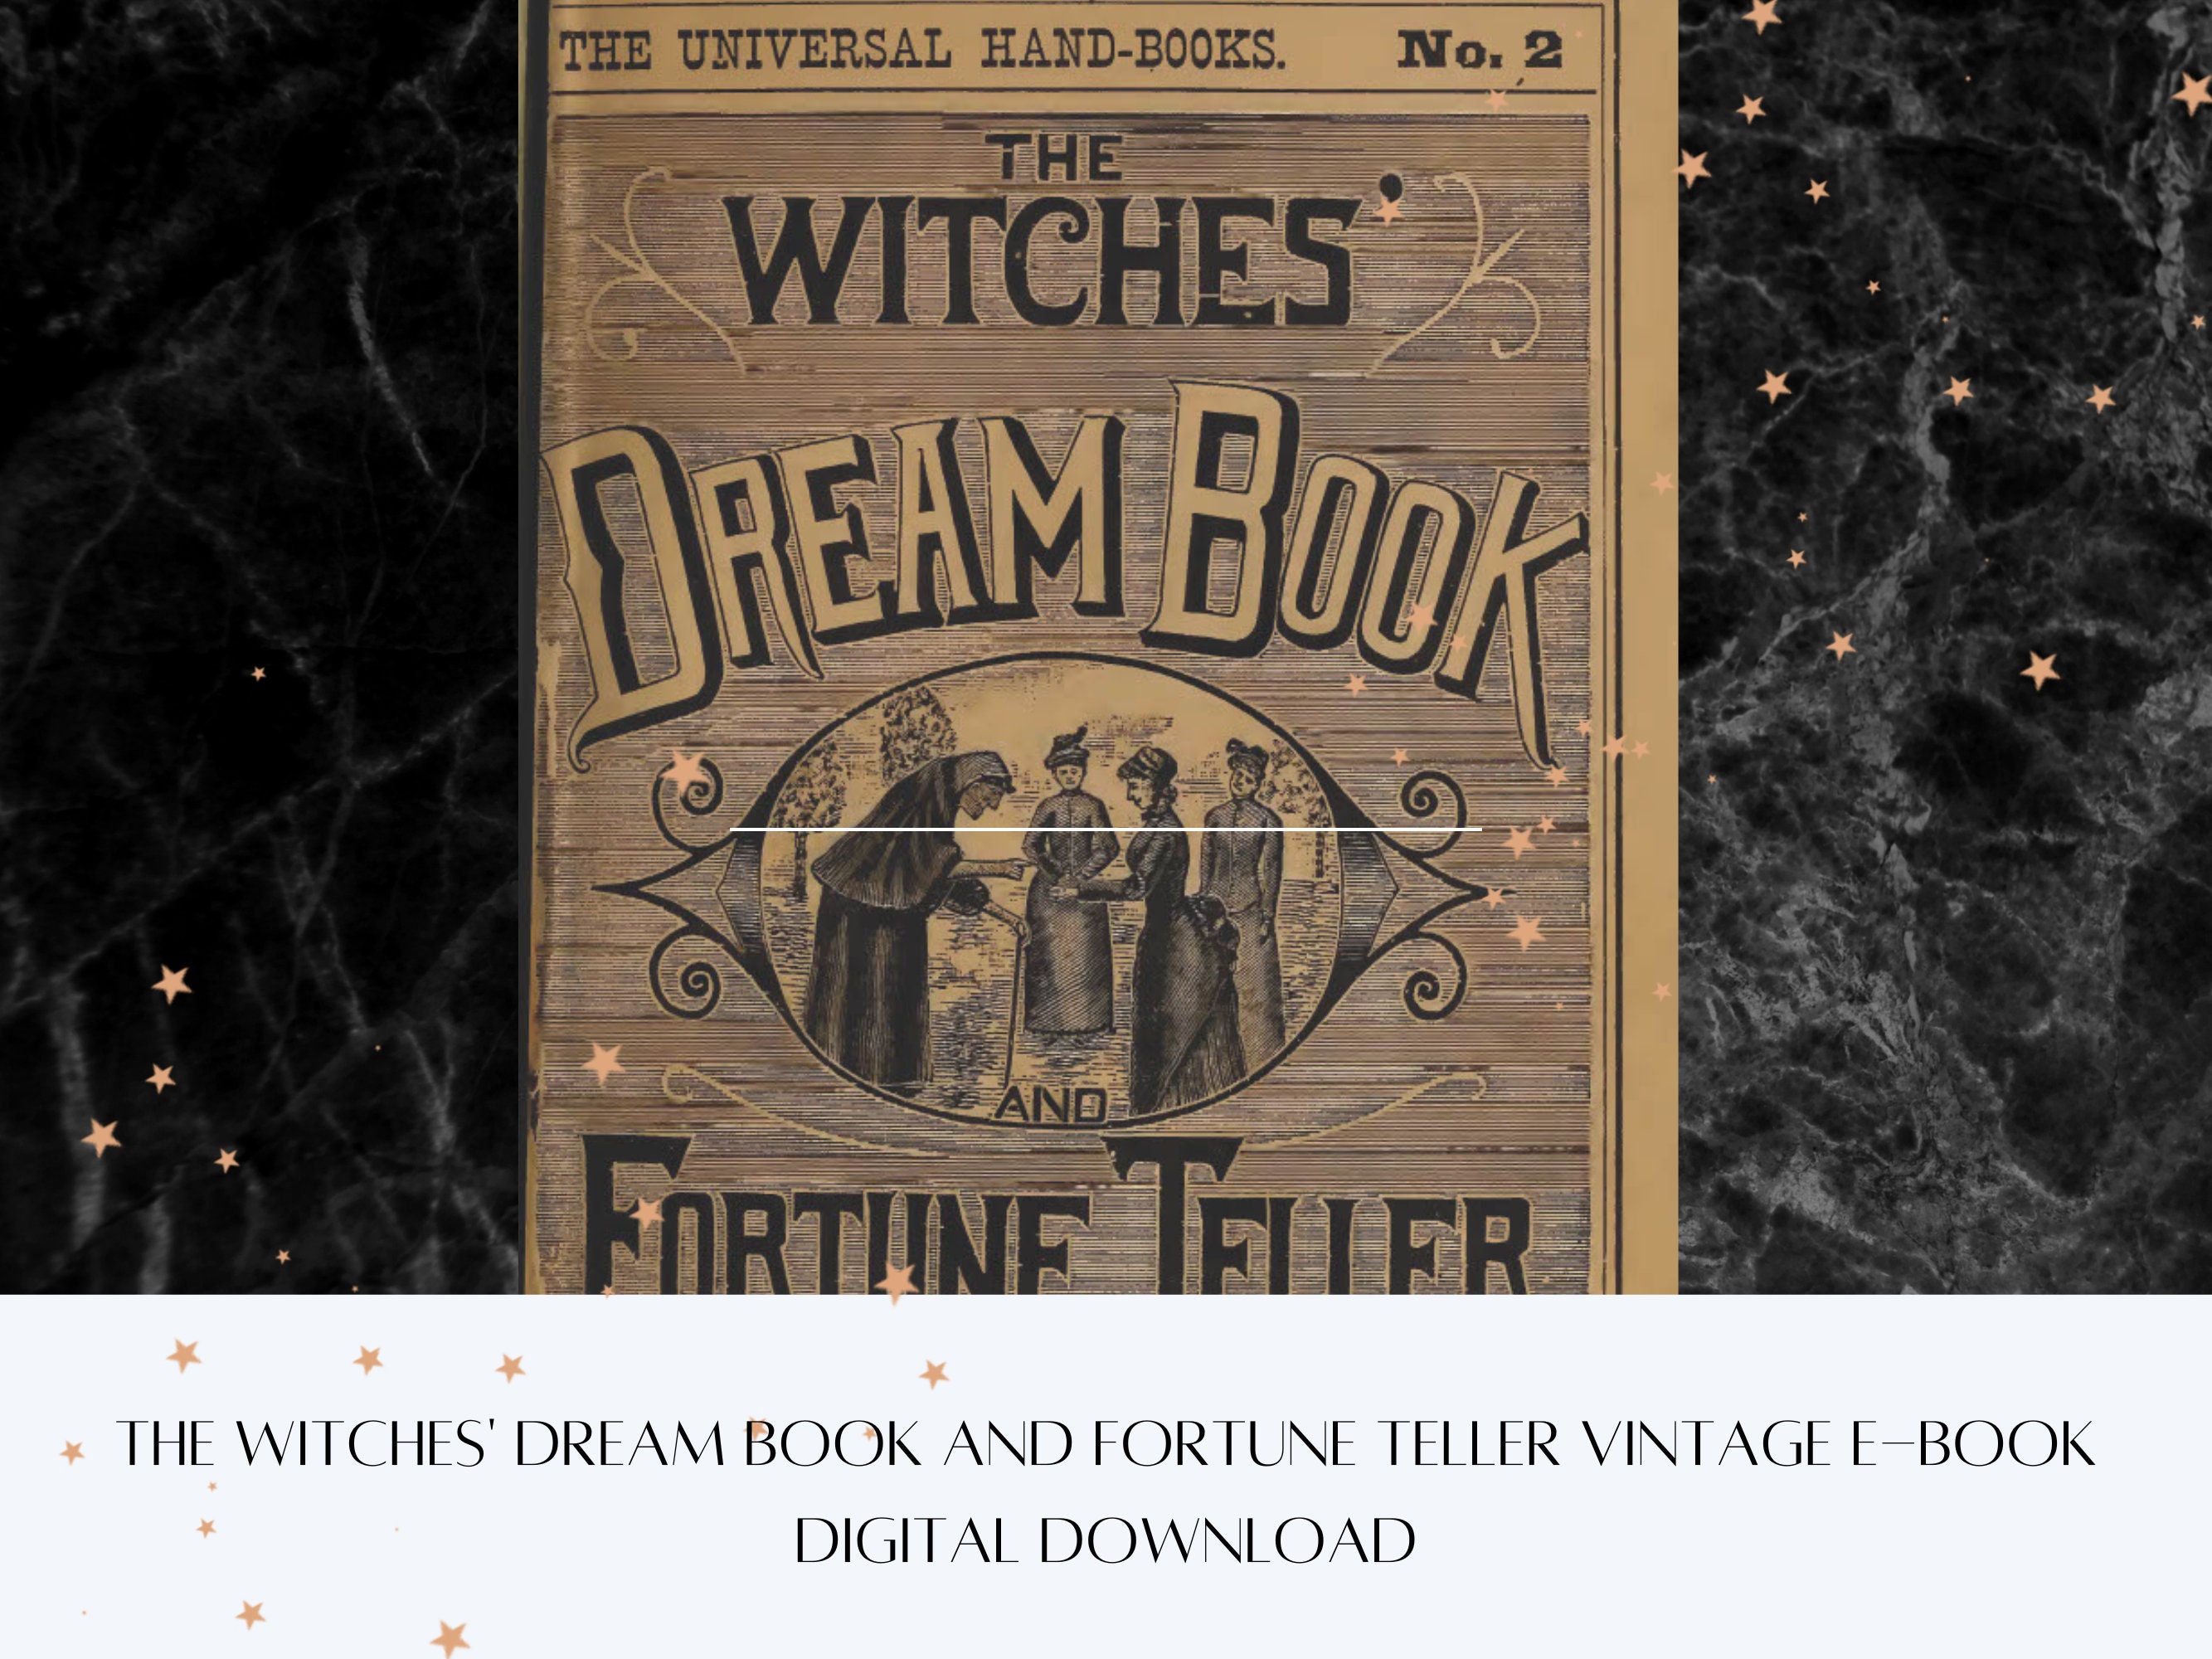 The Witches Dream Book and Fortune Teller by Henry